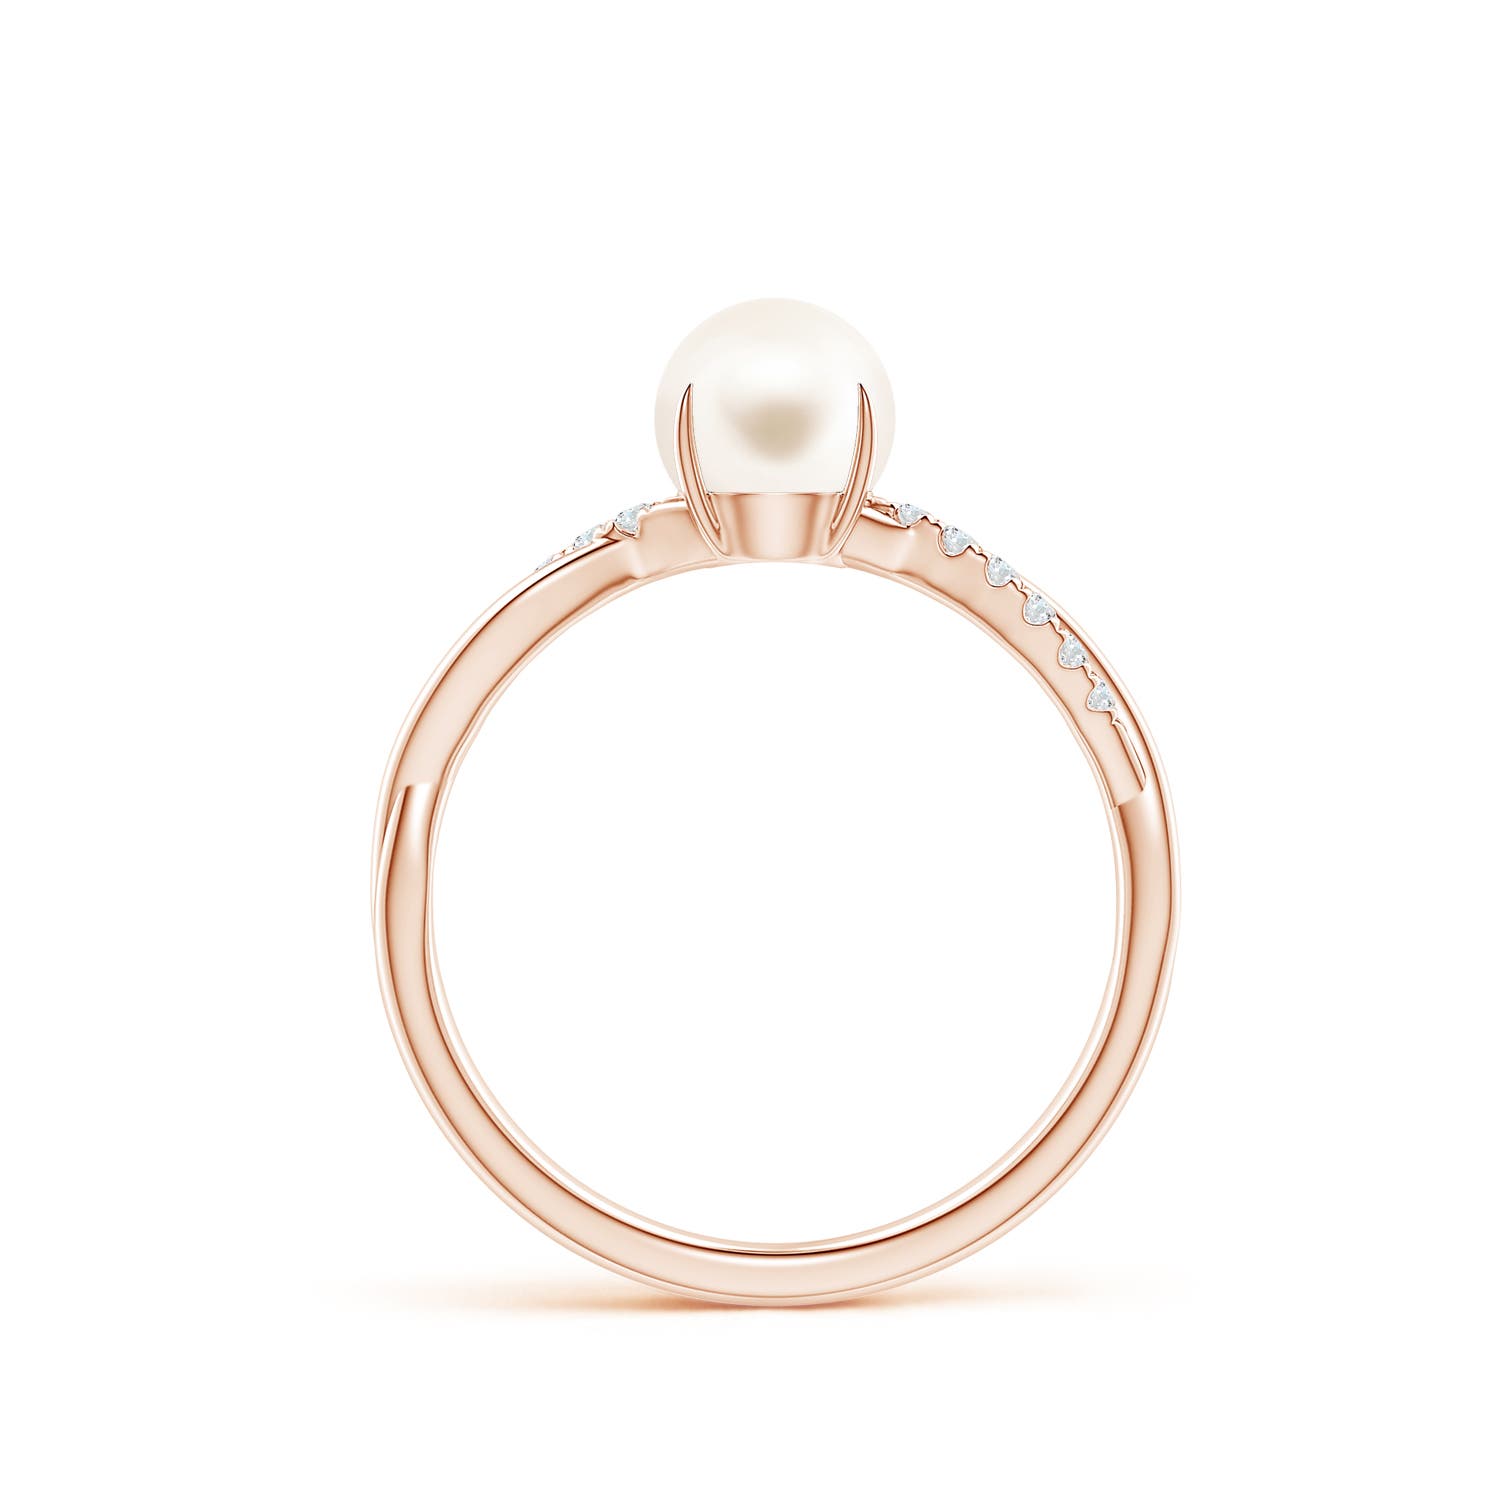 AAA / 1.67 CT / 14 KT Rose Gold